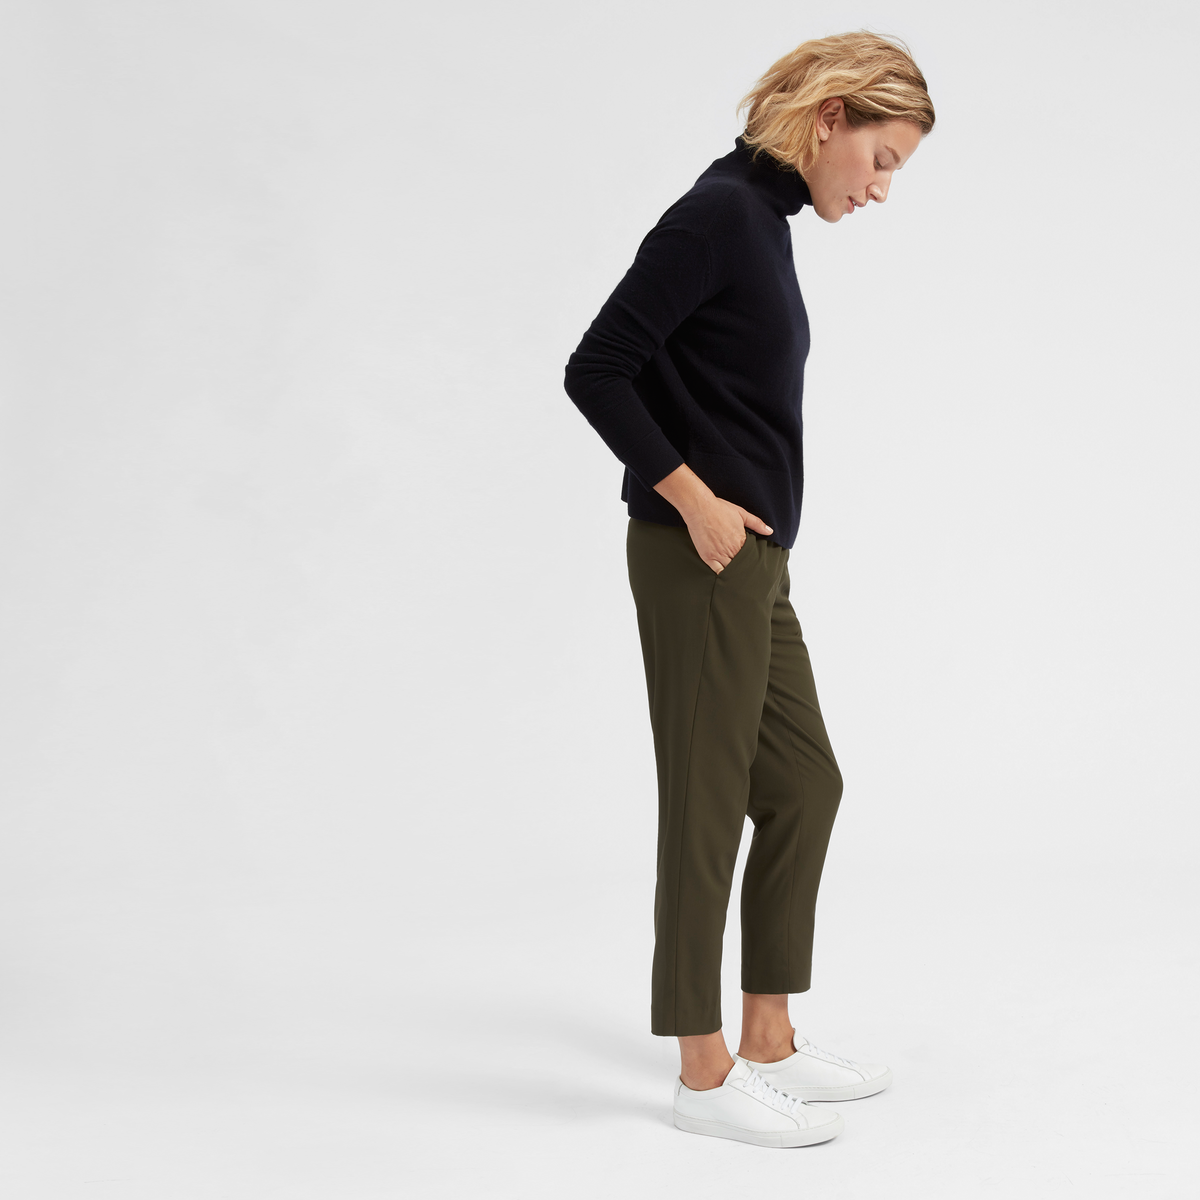 A model wears the Everlane GoWeave Easy Pant in olive green with white sneakers and a black sweater.